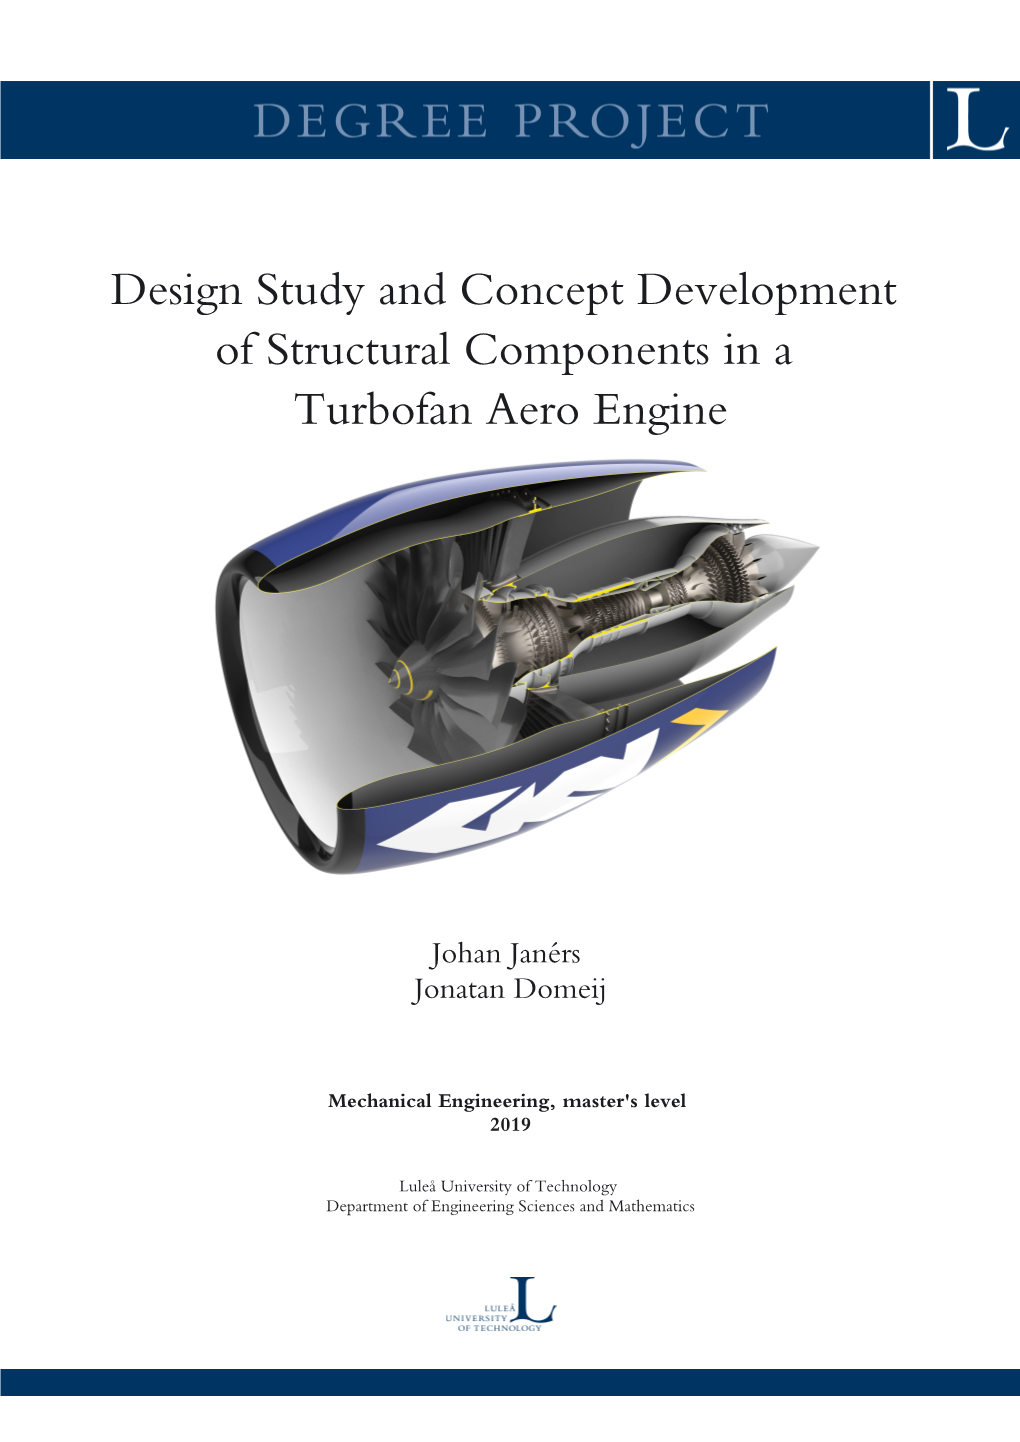 Design Study and Concept Development of Structural Components in a Turbofan Aero Engine